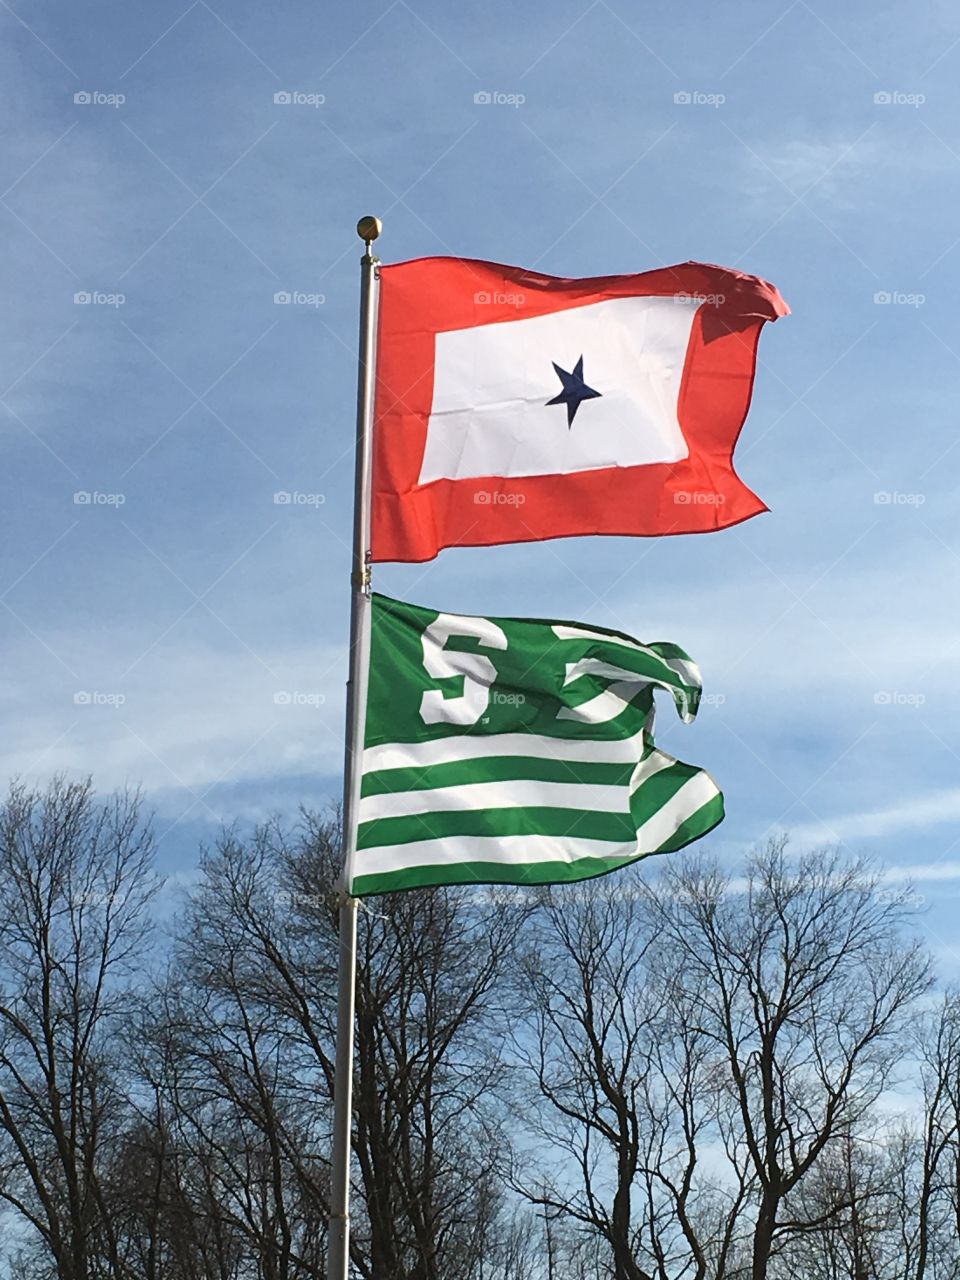 Display of family pride, respect, honor as our flags blow in the Michigan spring winds.